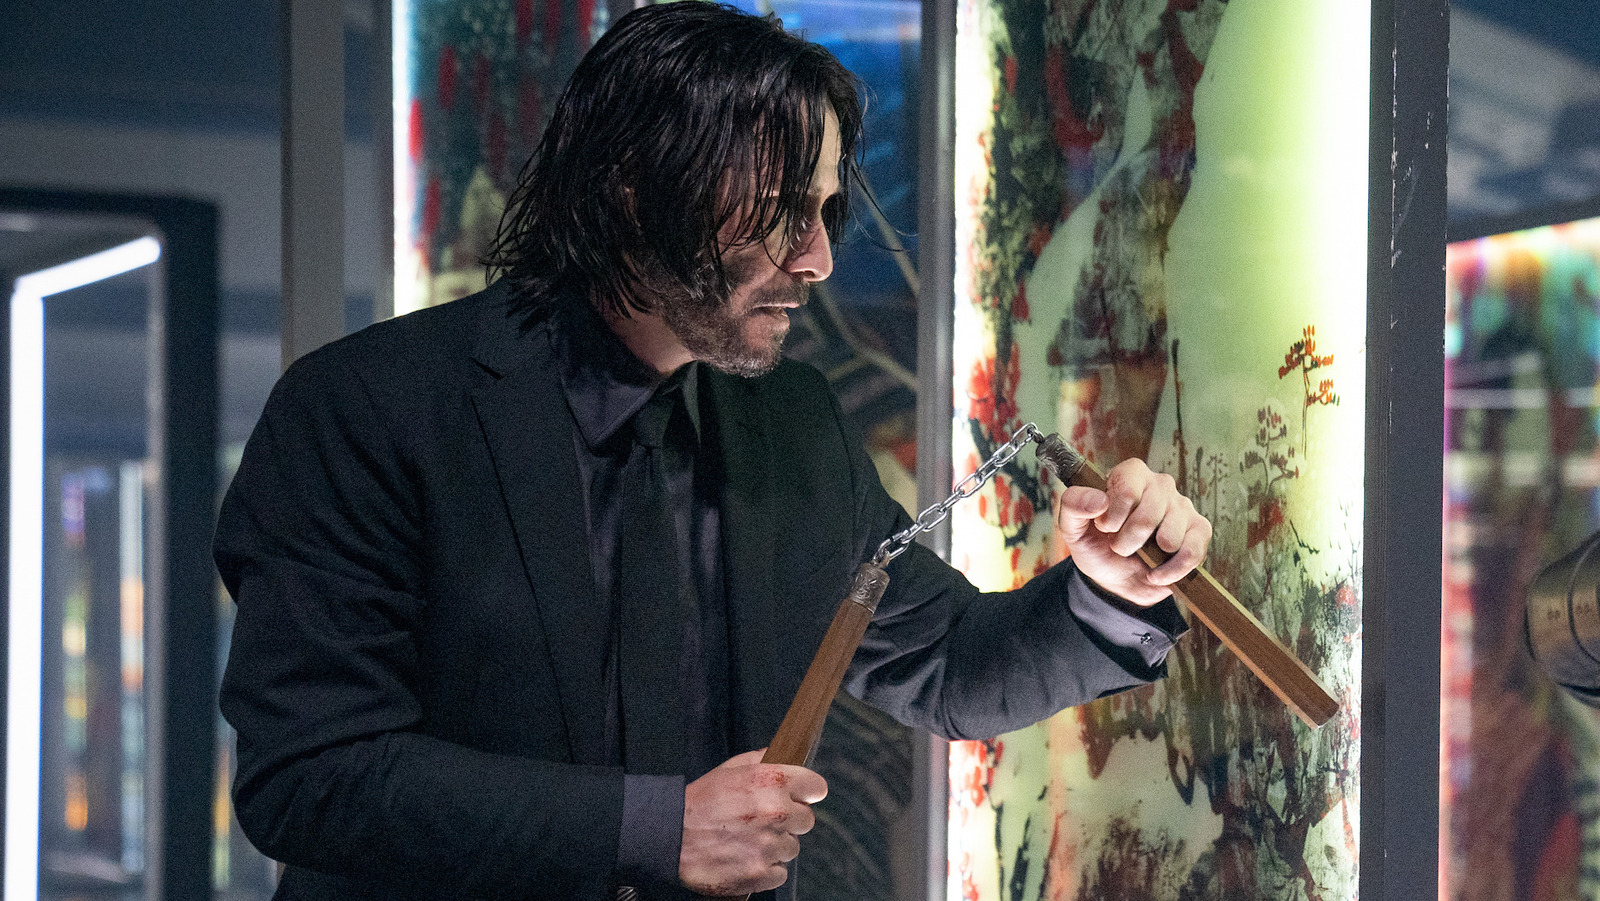 Exclusive John Wick 4 Clip Shows Off Keanu Reeves’ Nunchuck Skills